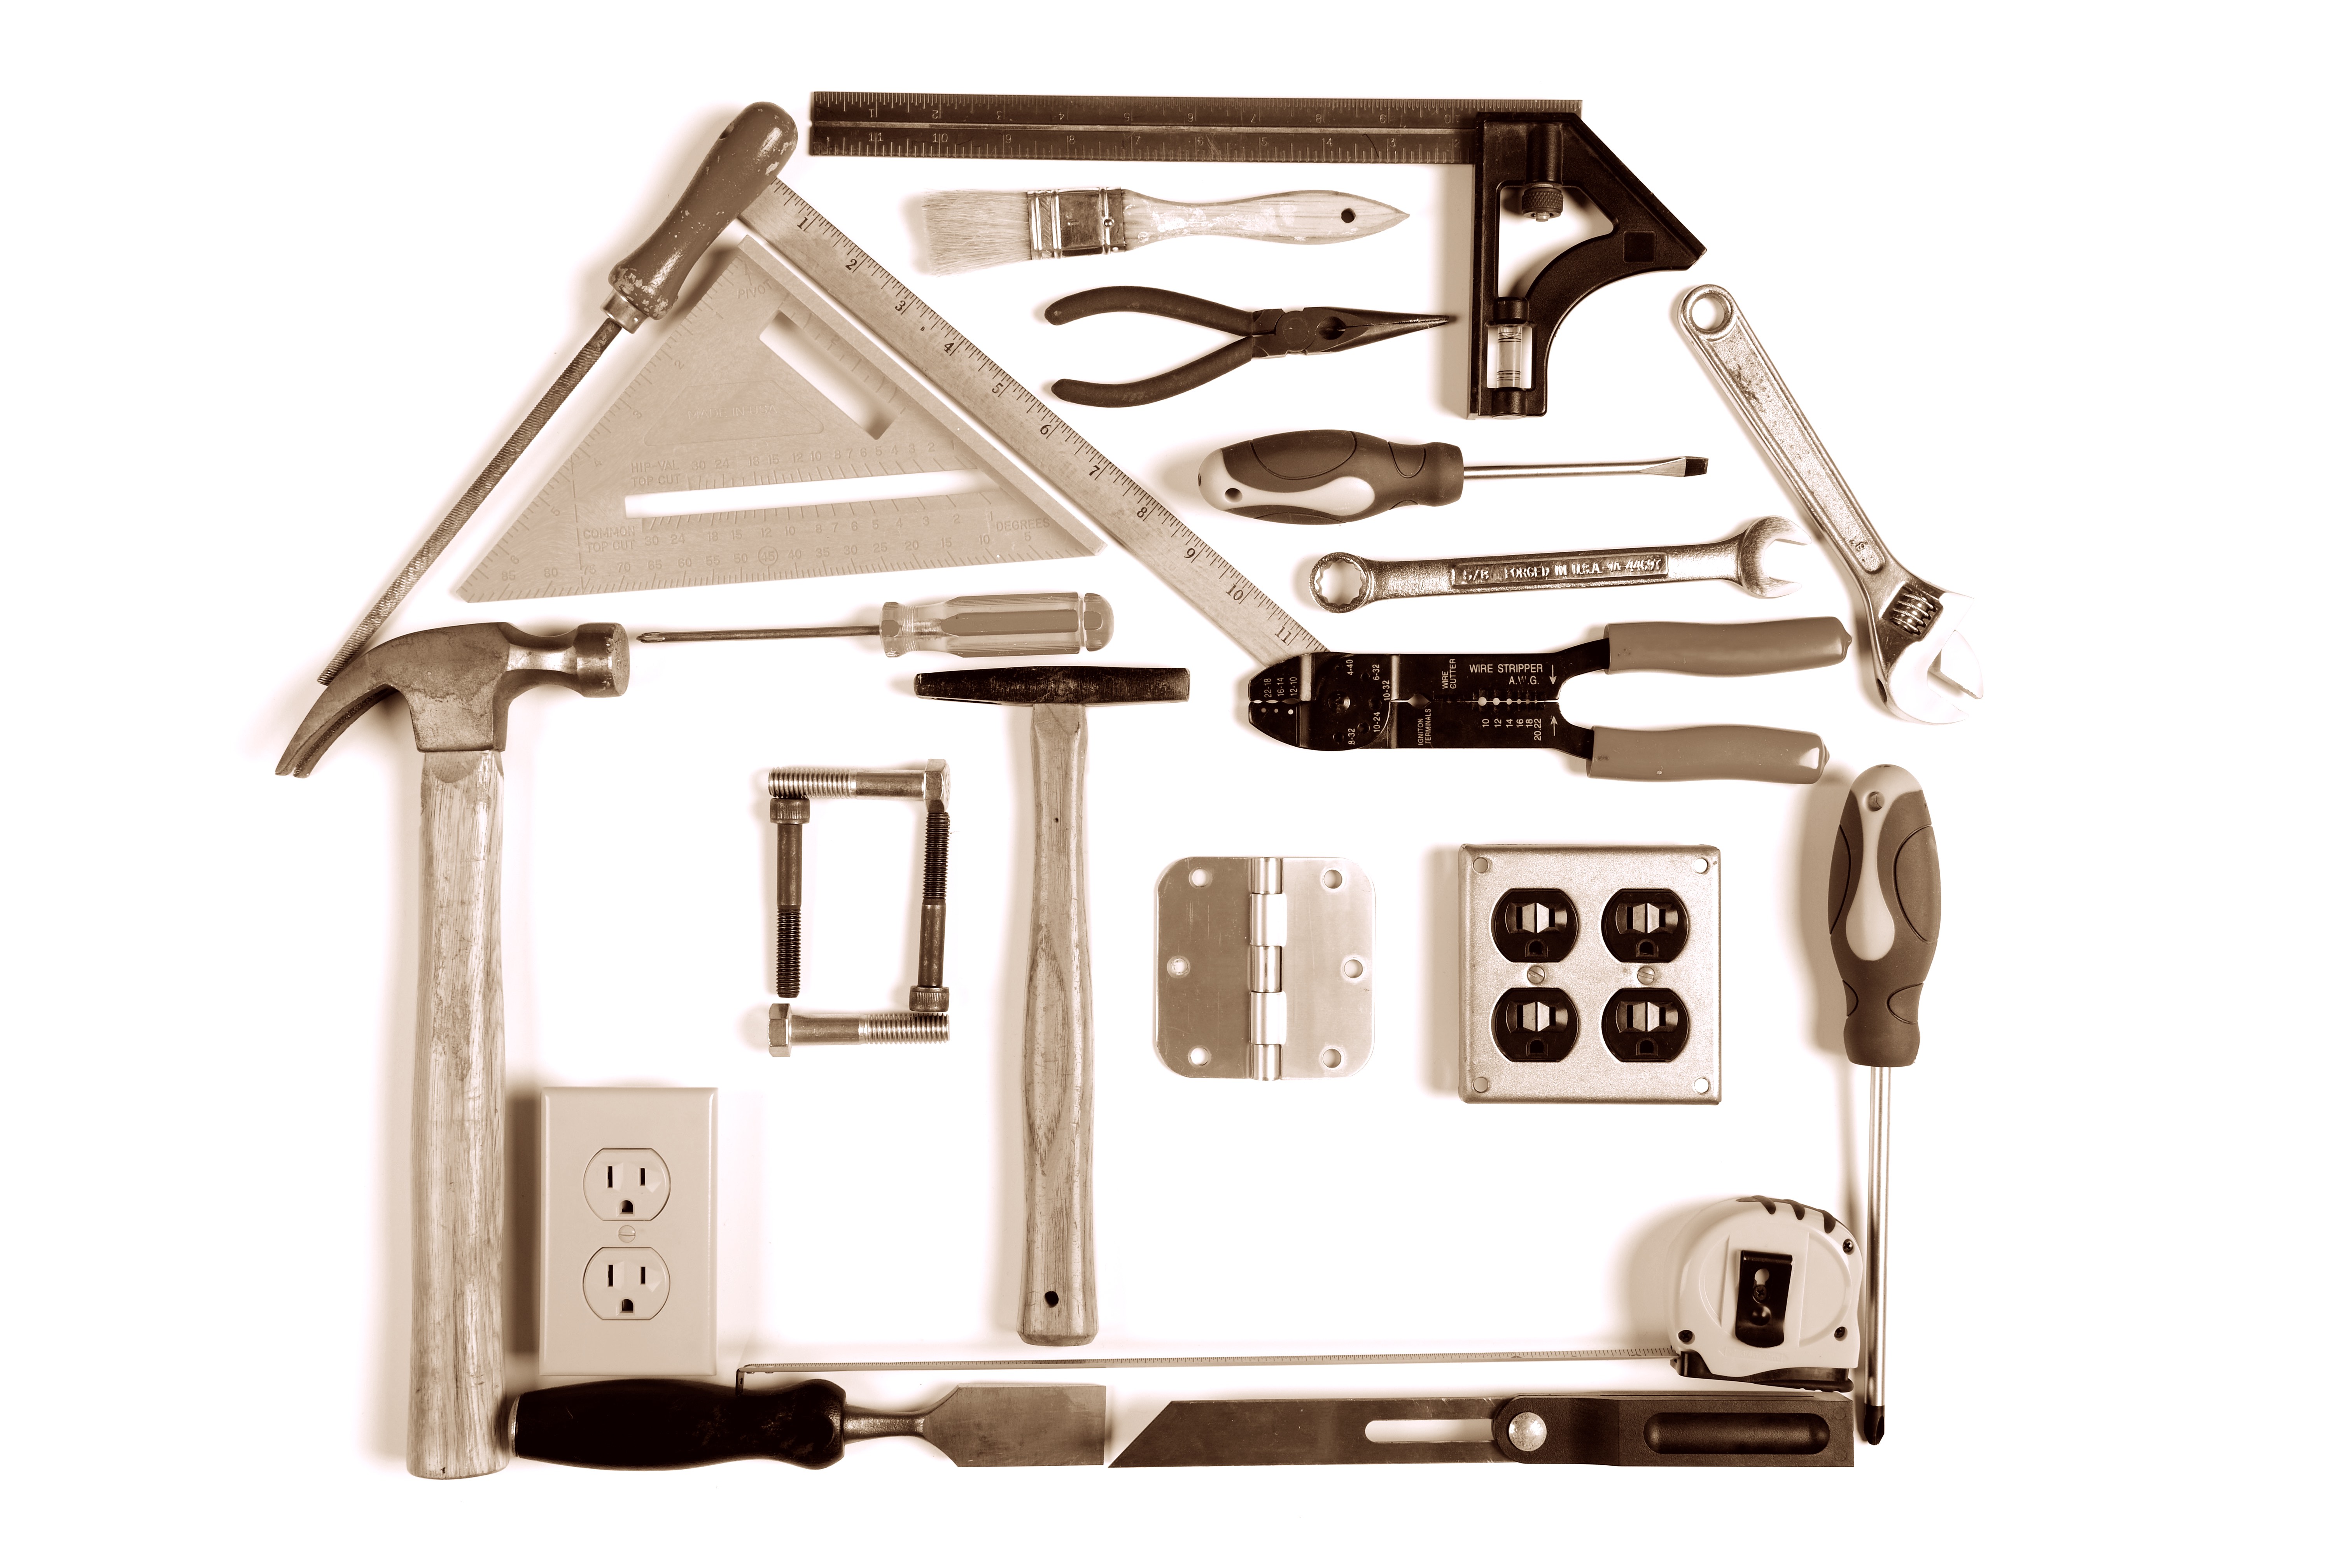 House made of tools over white background